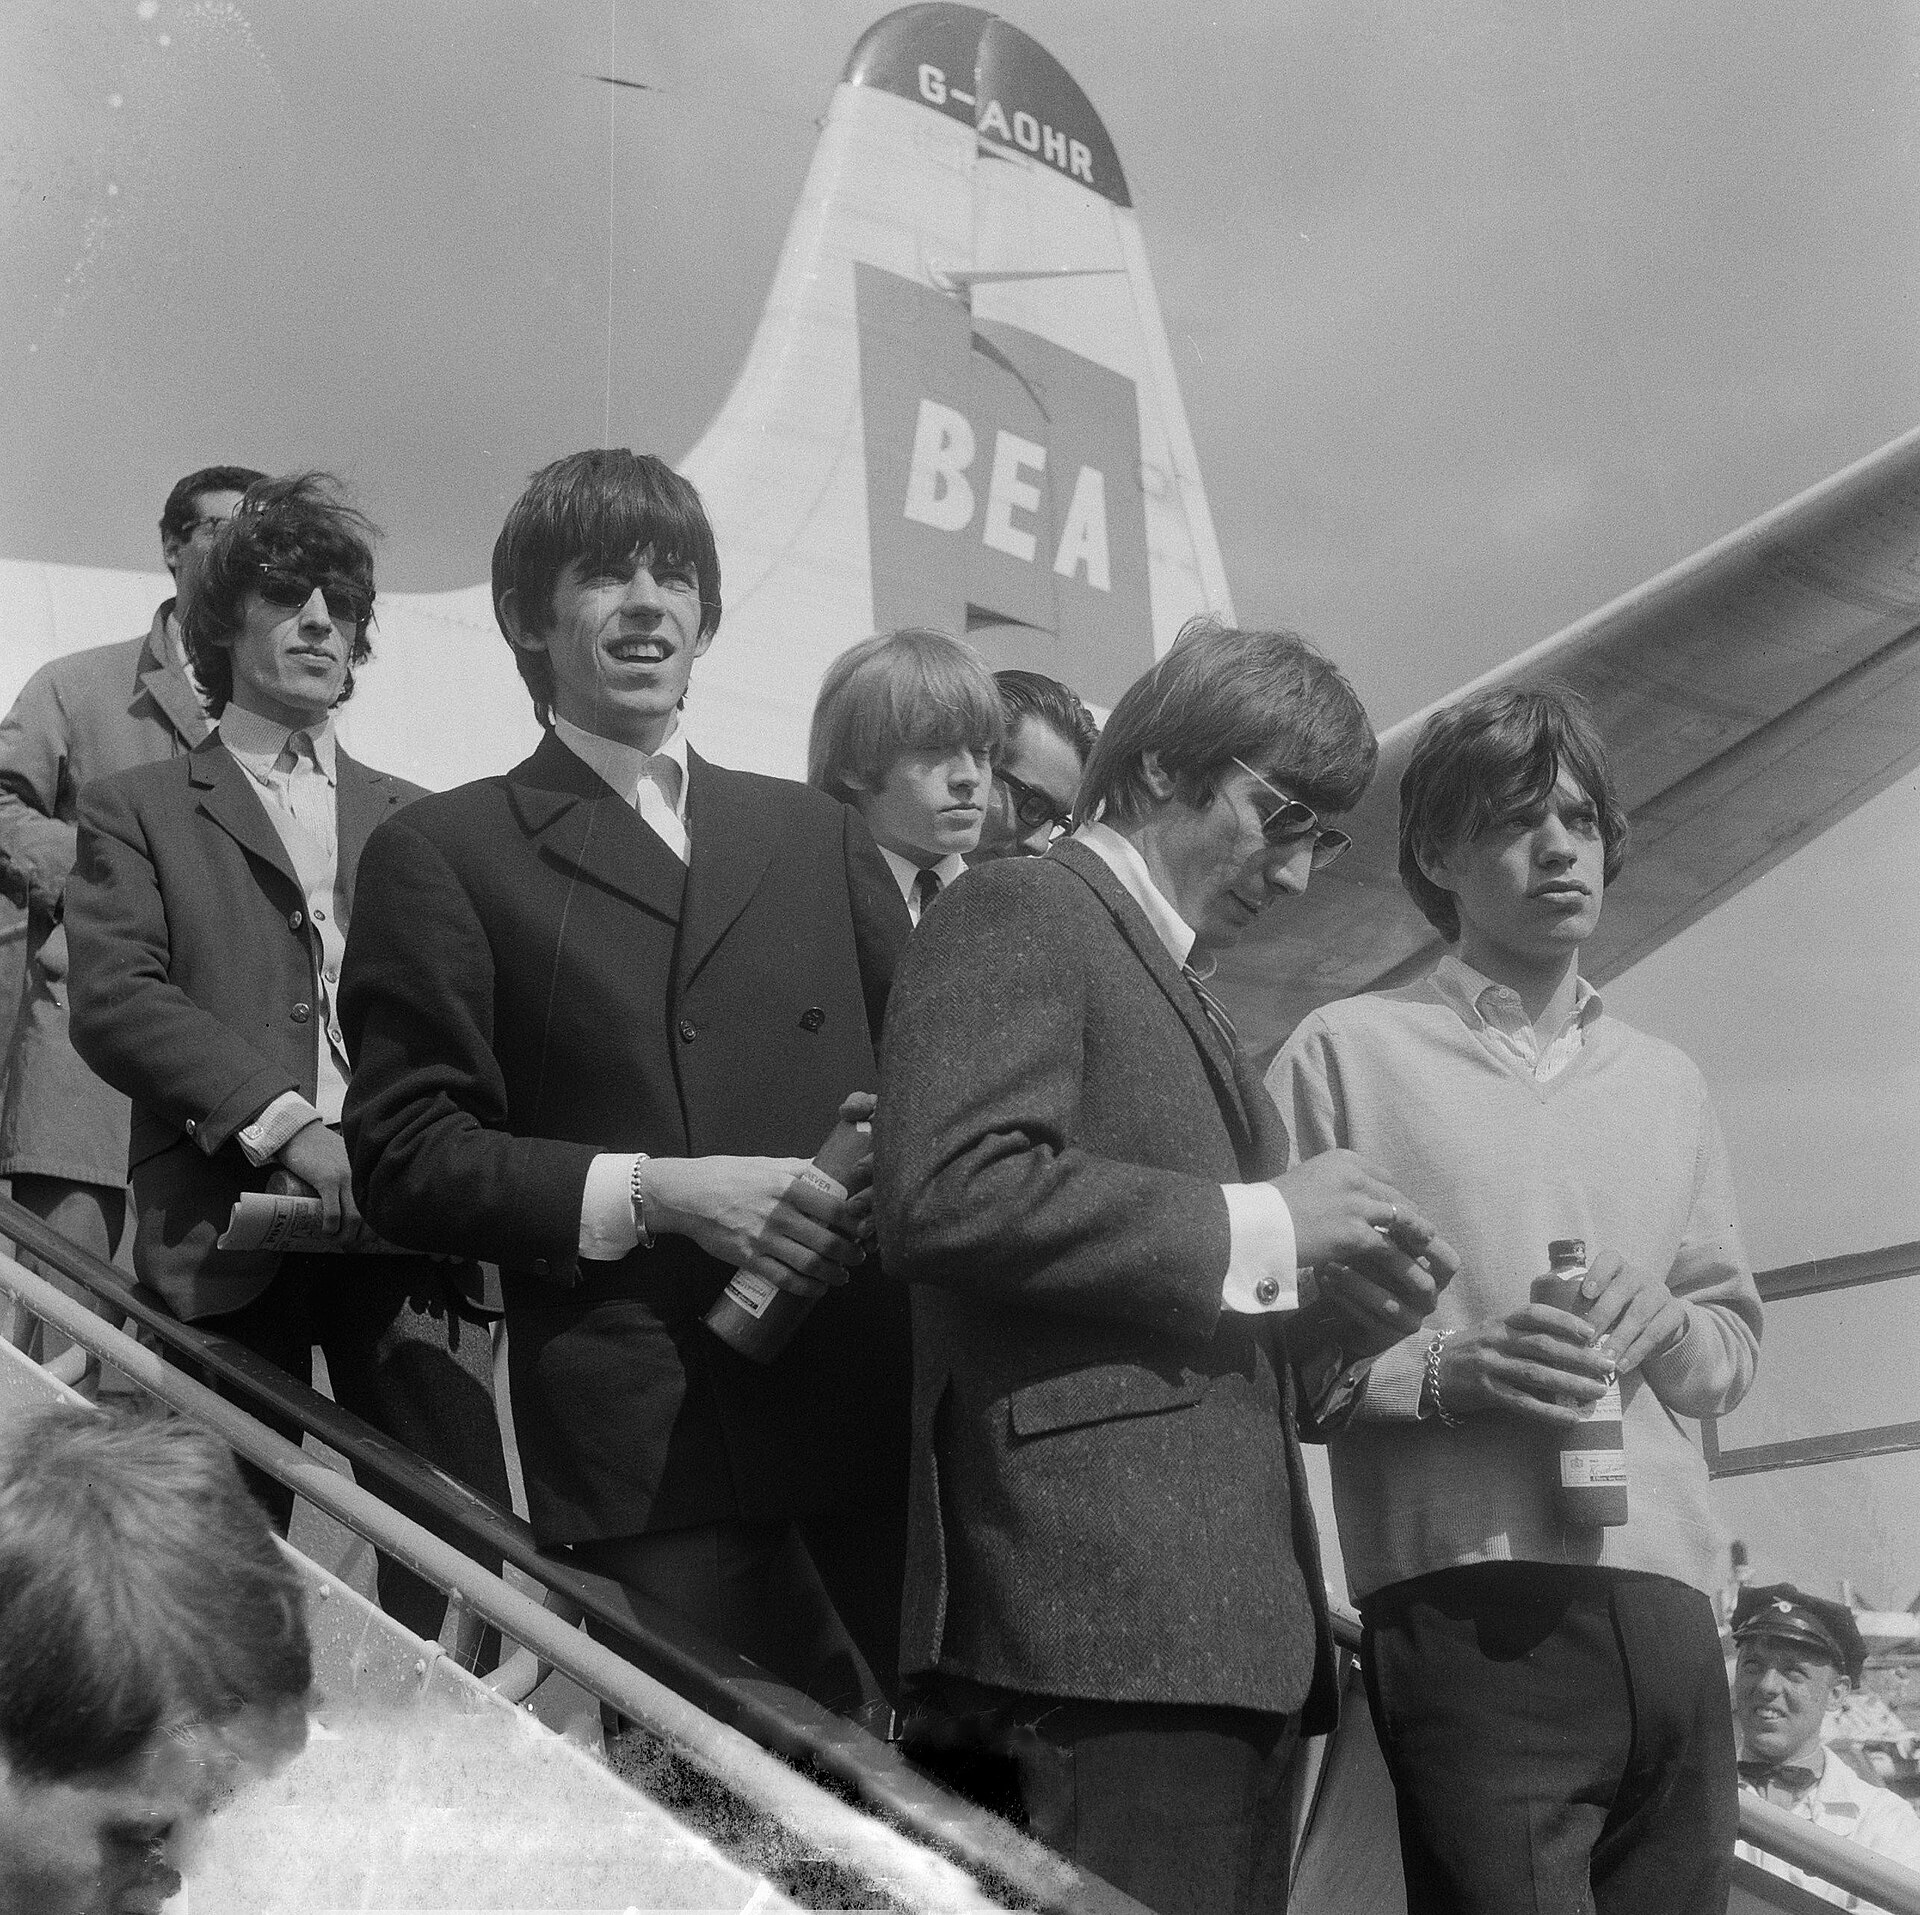  More details The Rolling Stones at Amsterdam Airport Schiphol, Netherlands, in 1964. From left to right: Wyman, Richards, Jones, Watts and Jagger